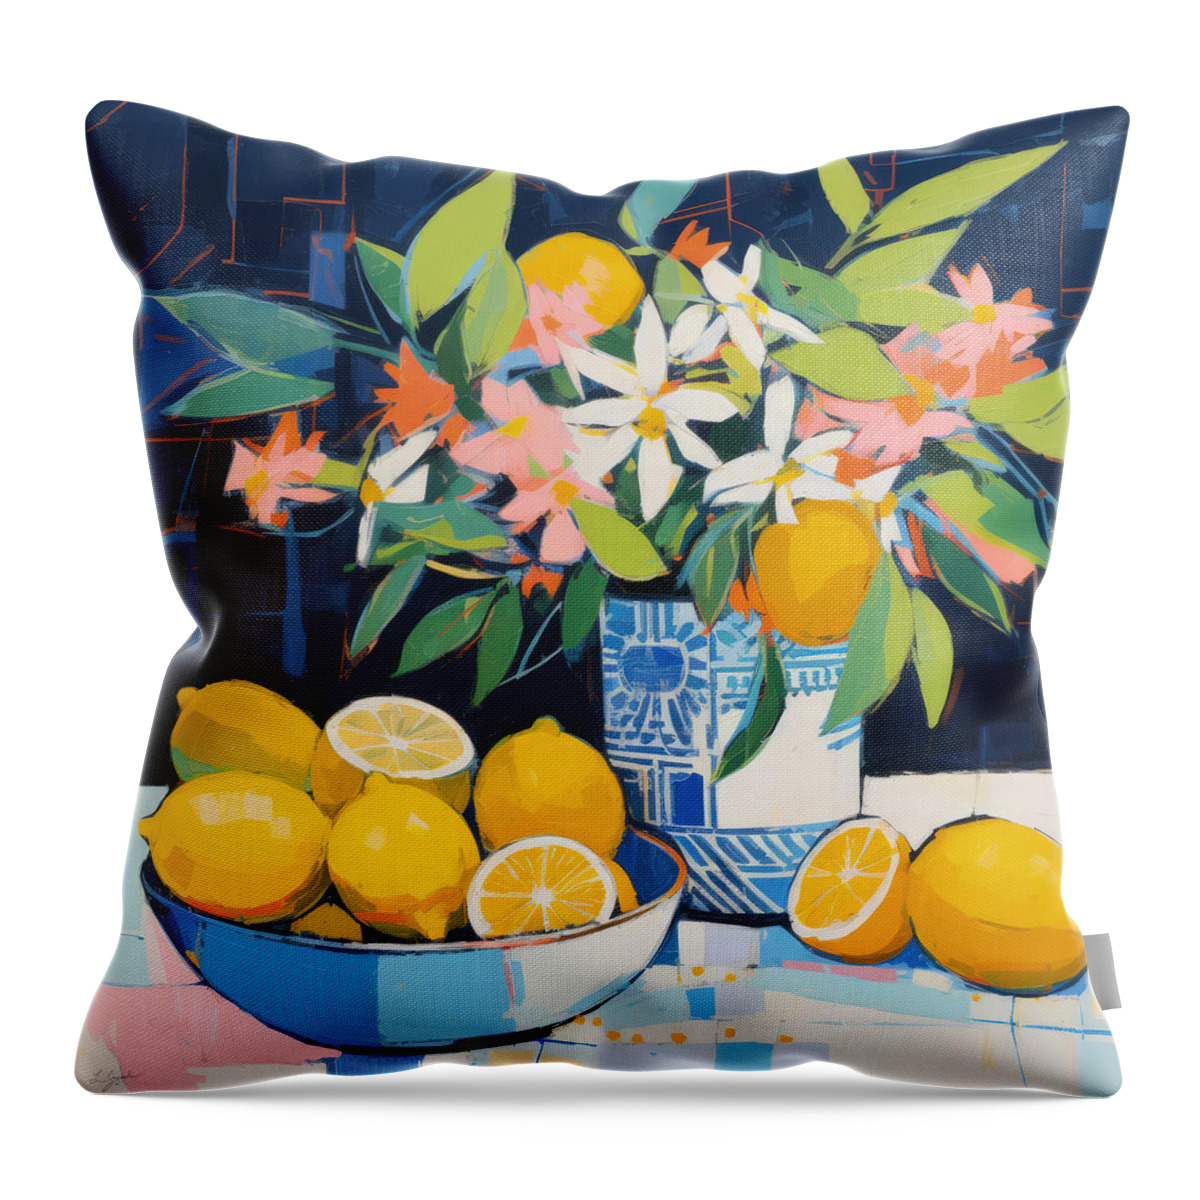 Lemons Throw Pillow featuring the painting Bowl of Lemons by Lourry Legarde